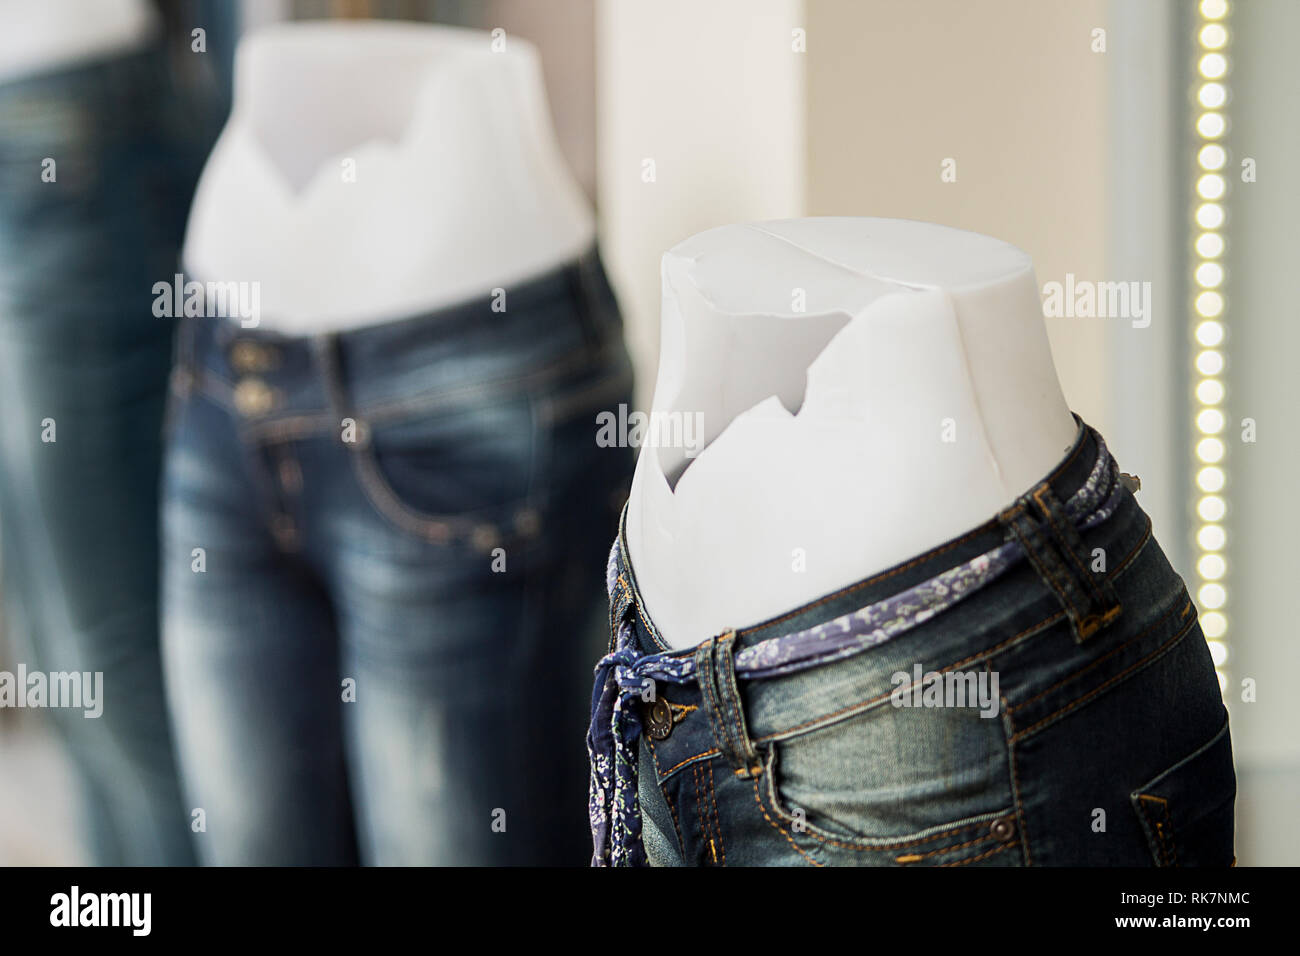 Close up image of lower body dummies broken at waist. Bad retail or diet - eating problems, oppression of women or consumerism concept. Stock Photo